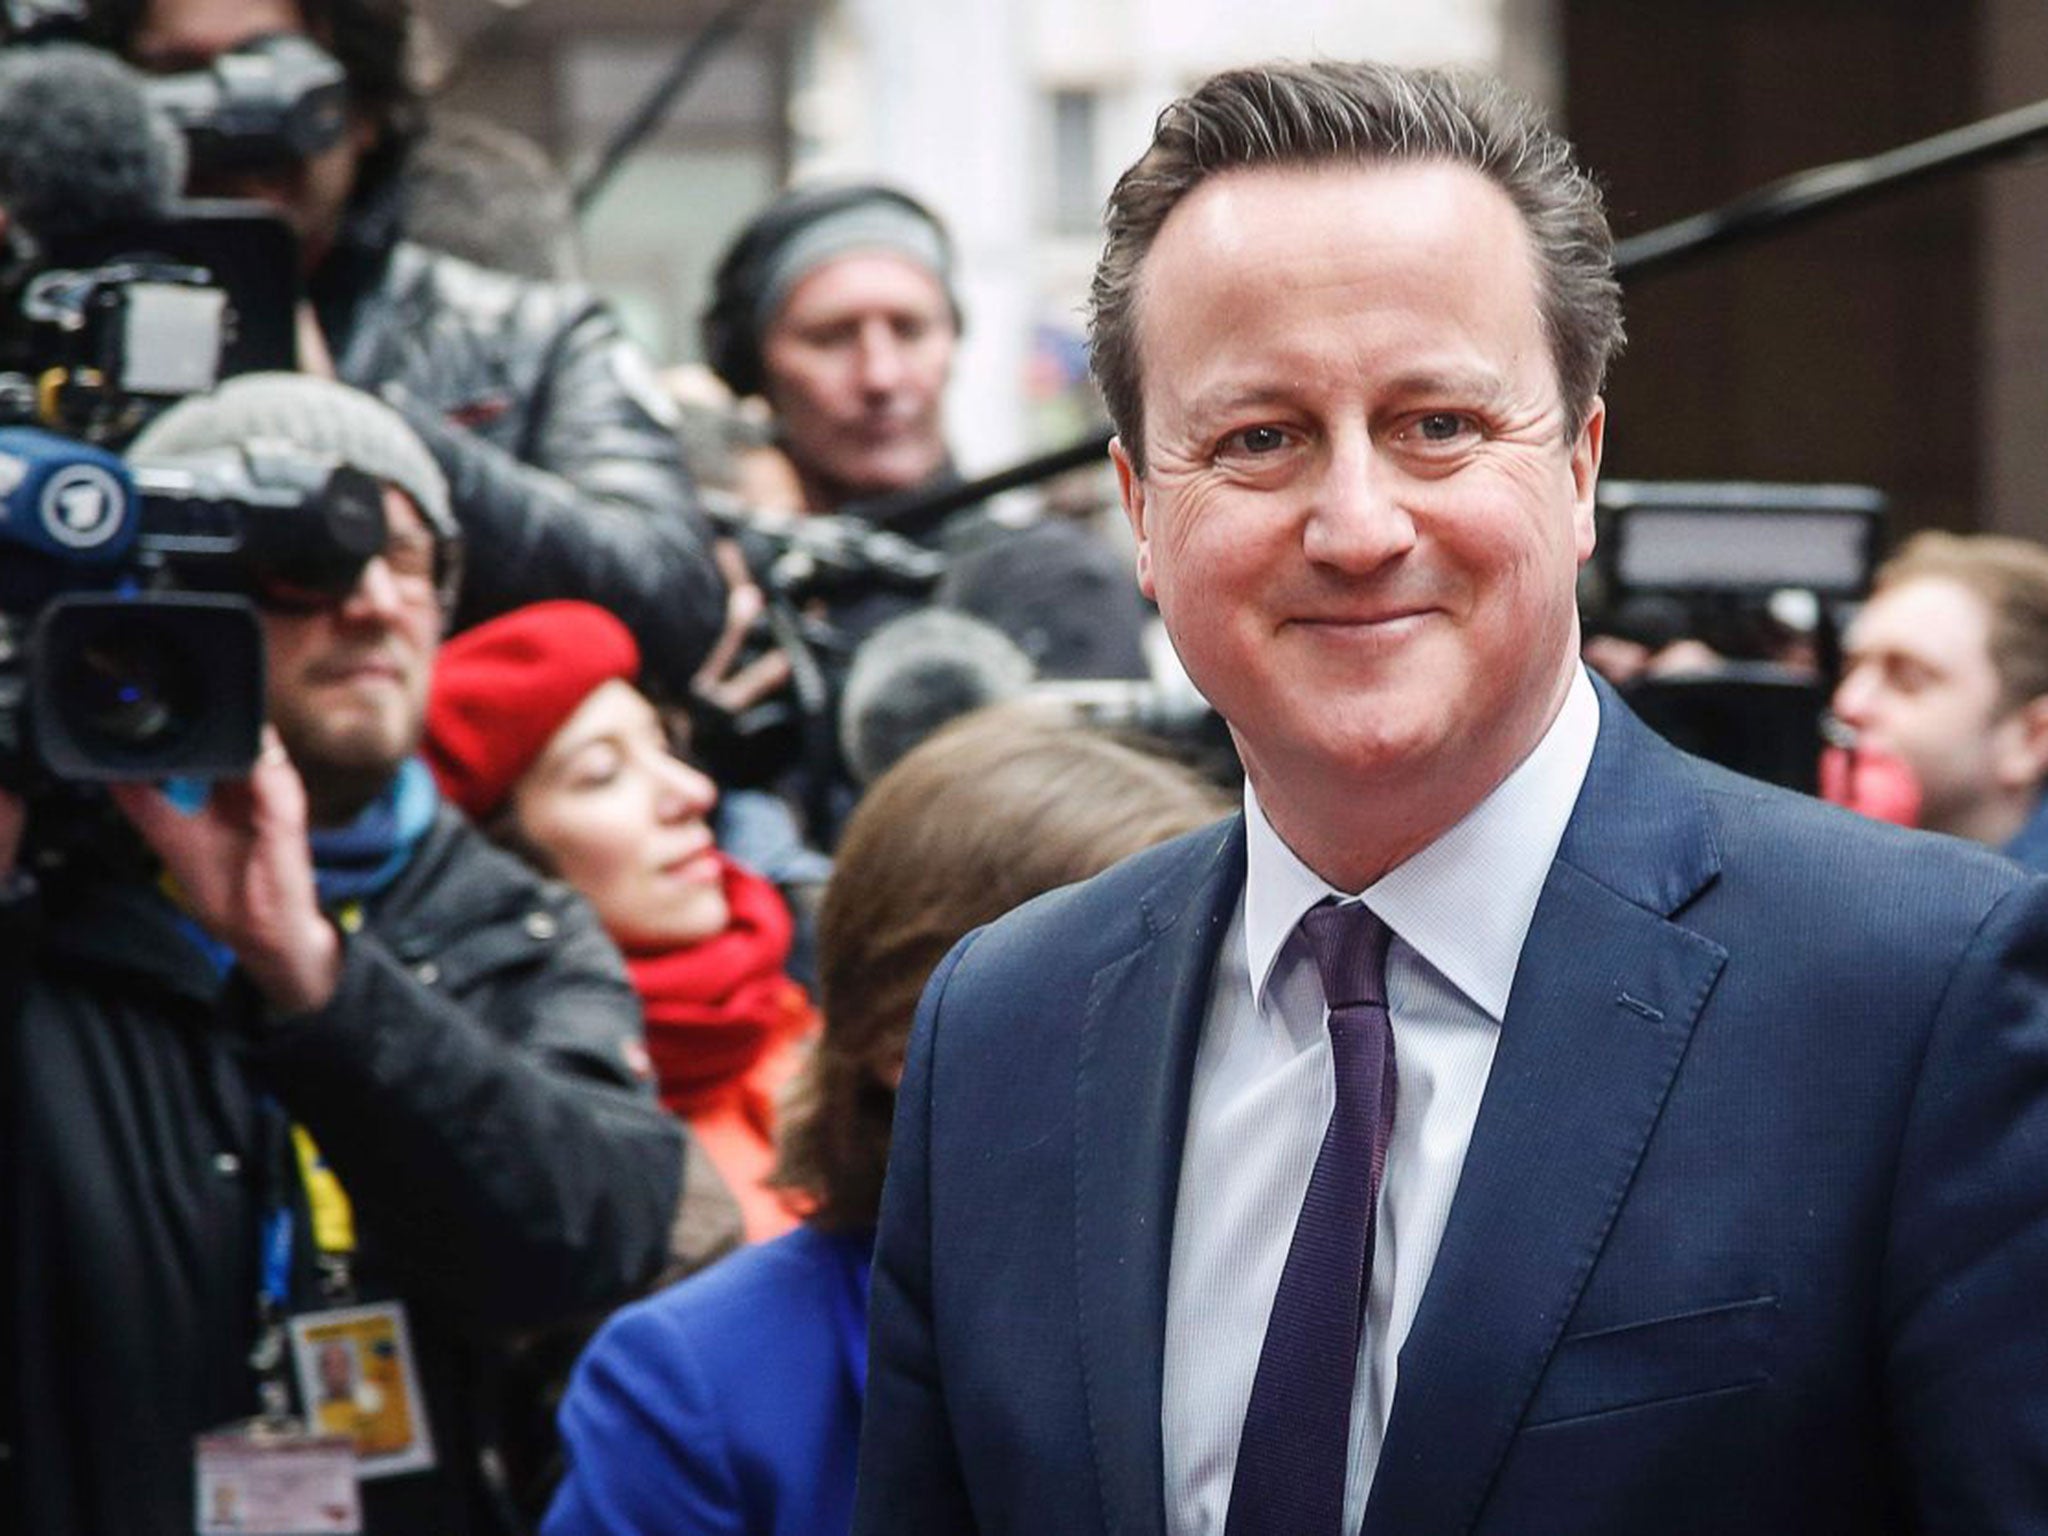 David Cameron said that Britain would not join a common asylum process in Europe